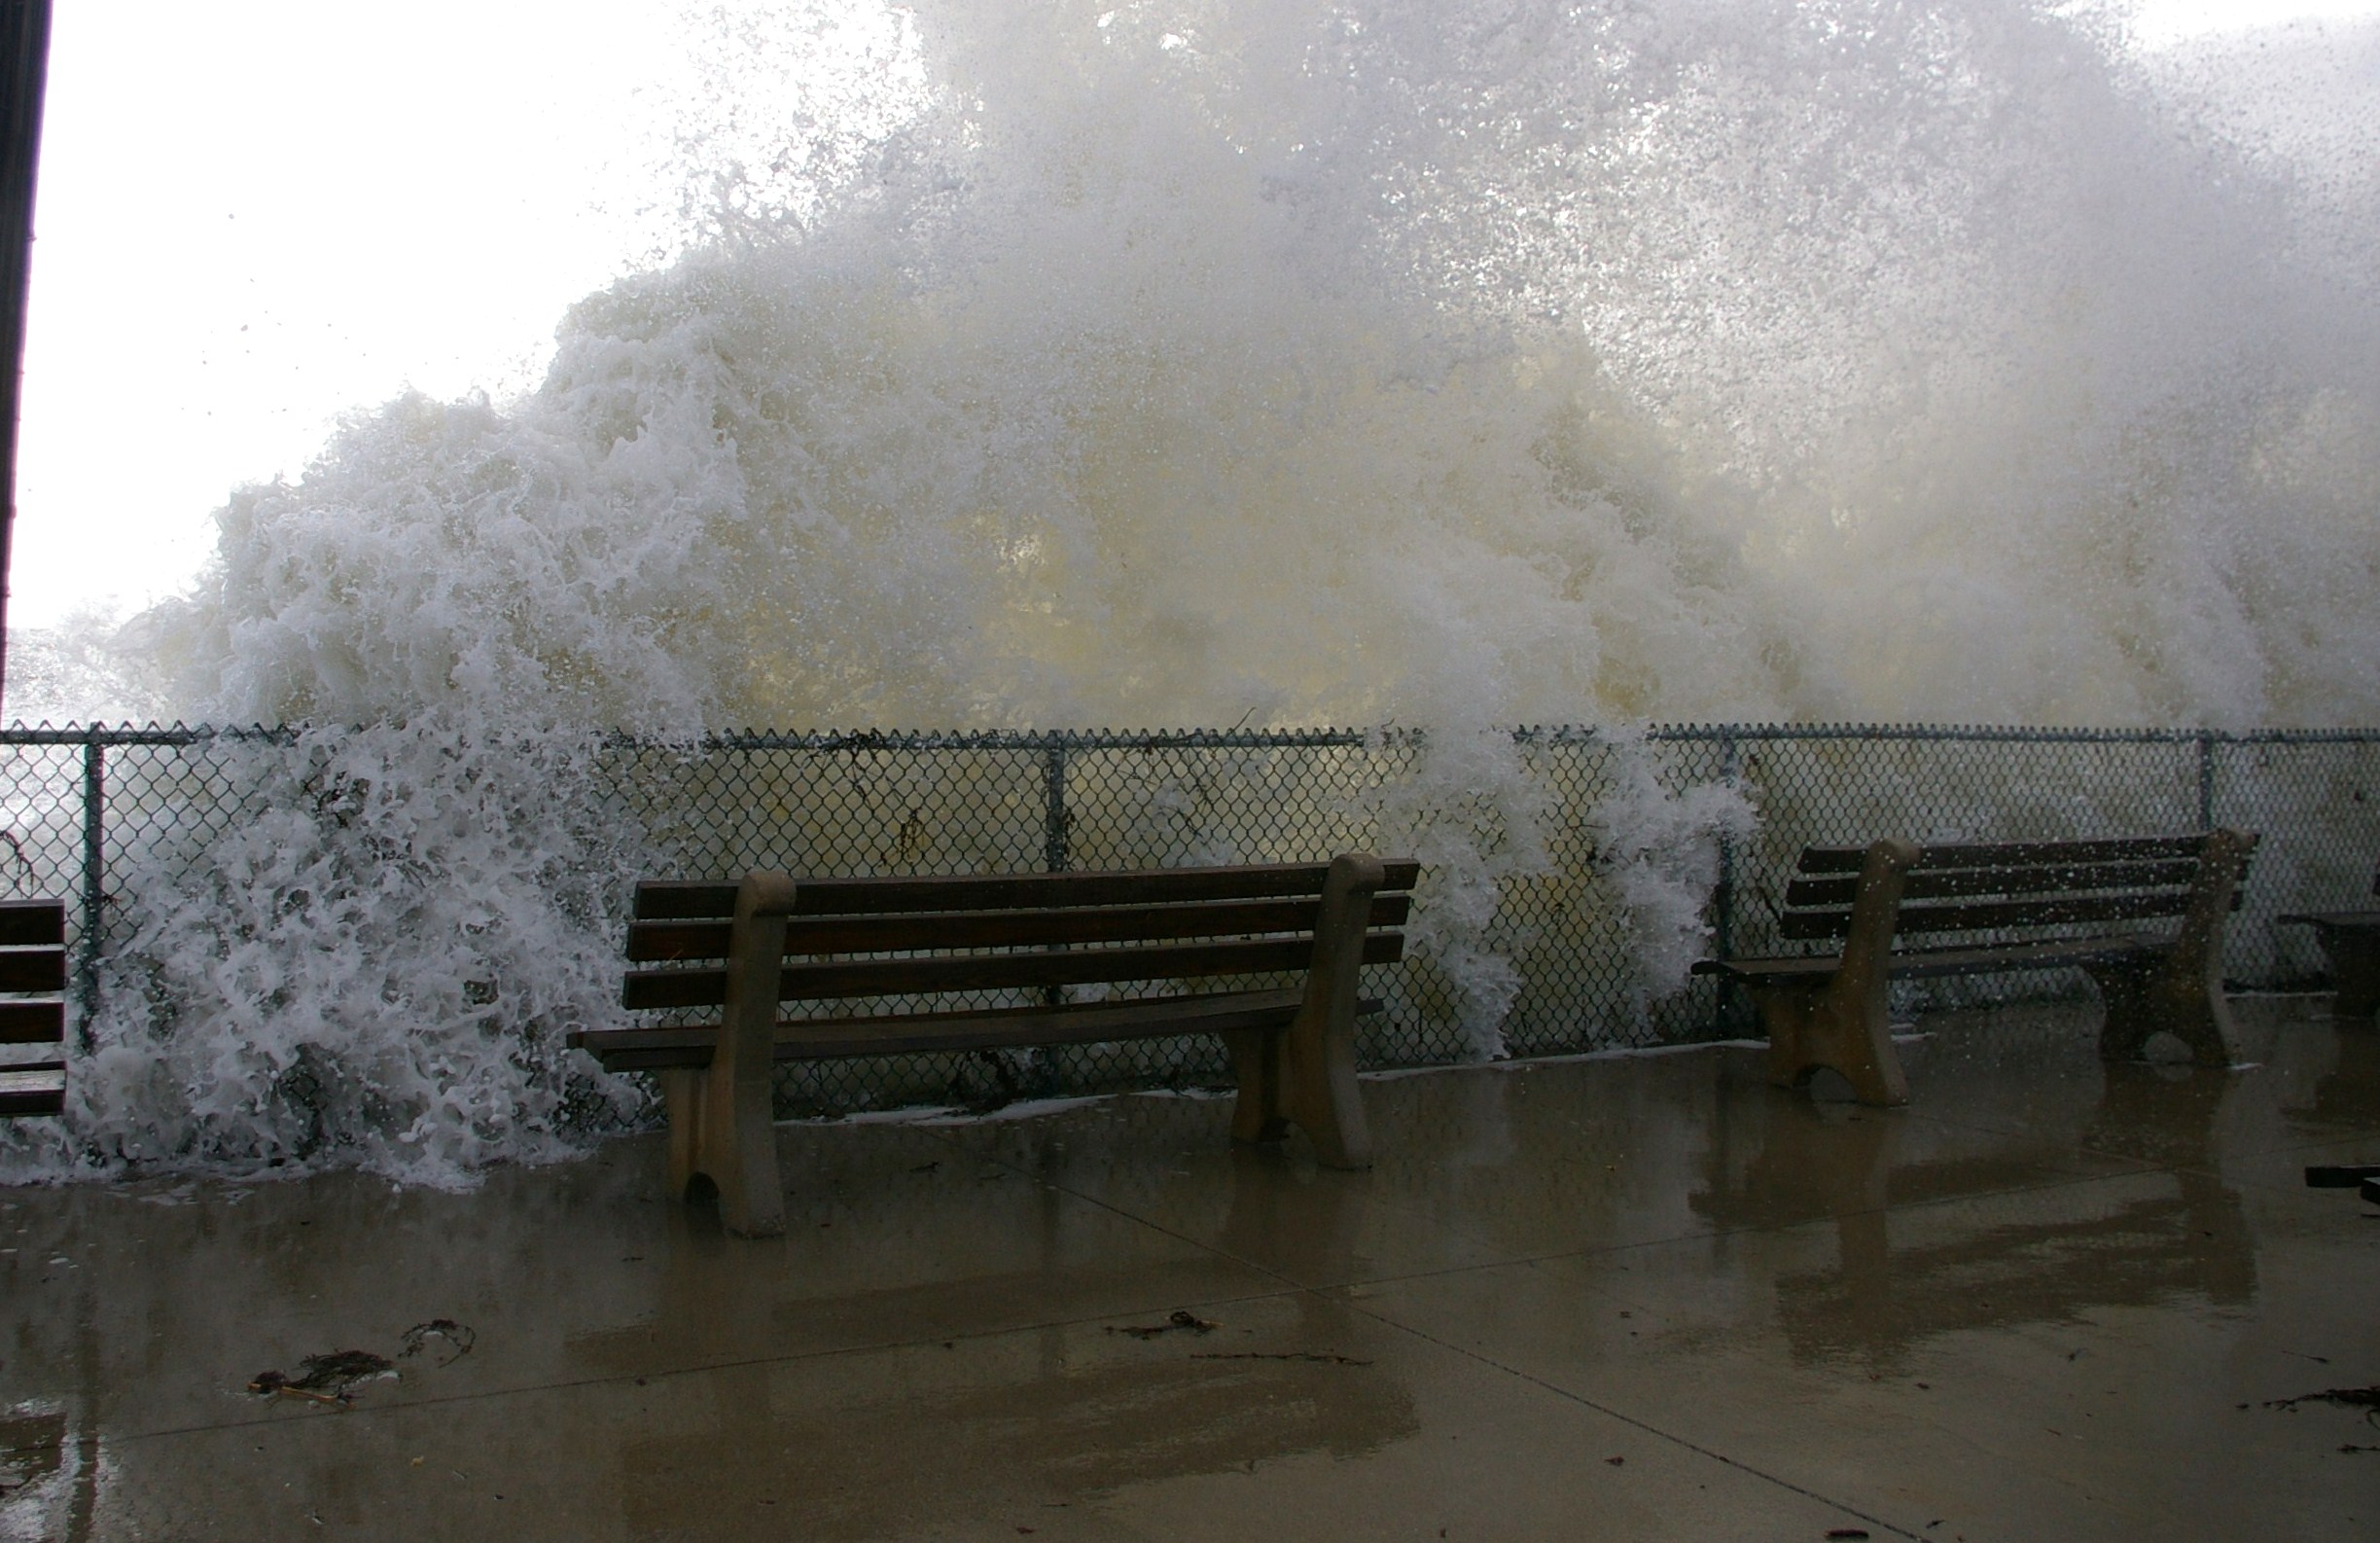 Waves Breaking Over Sea Wall In Storm (user submitted)